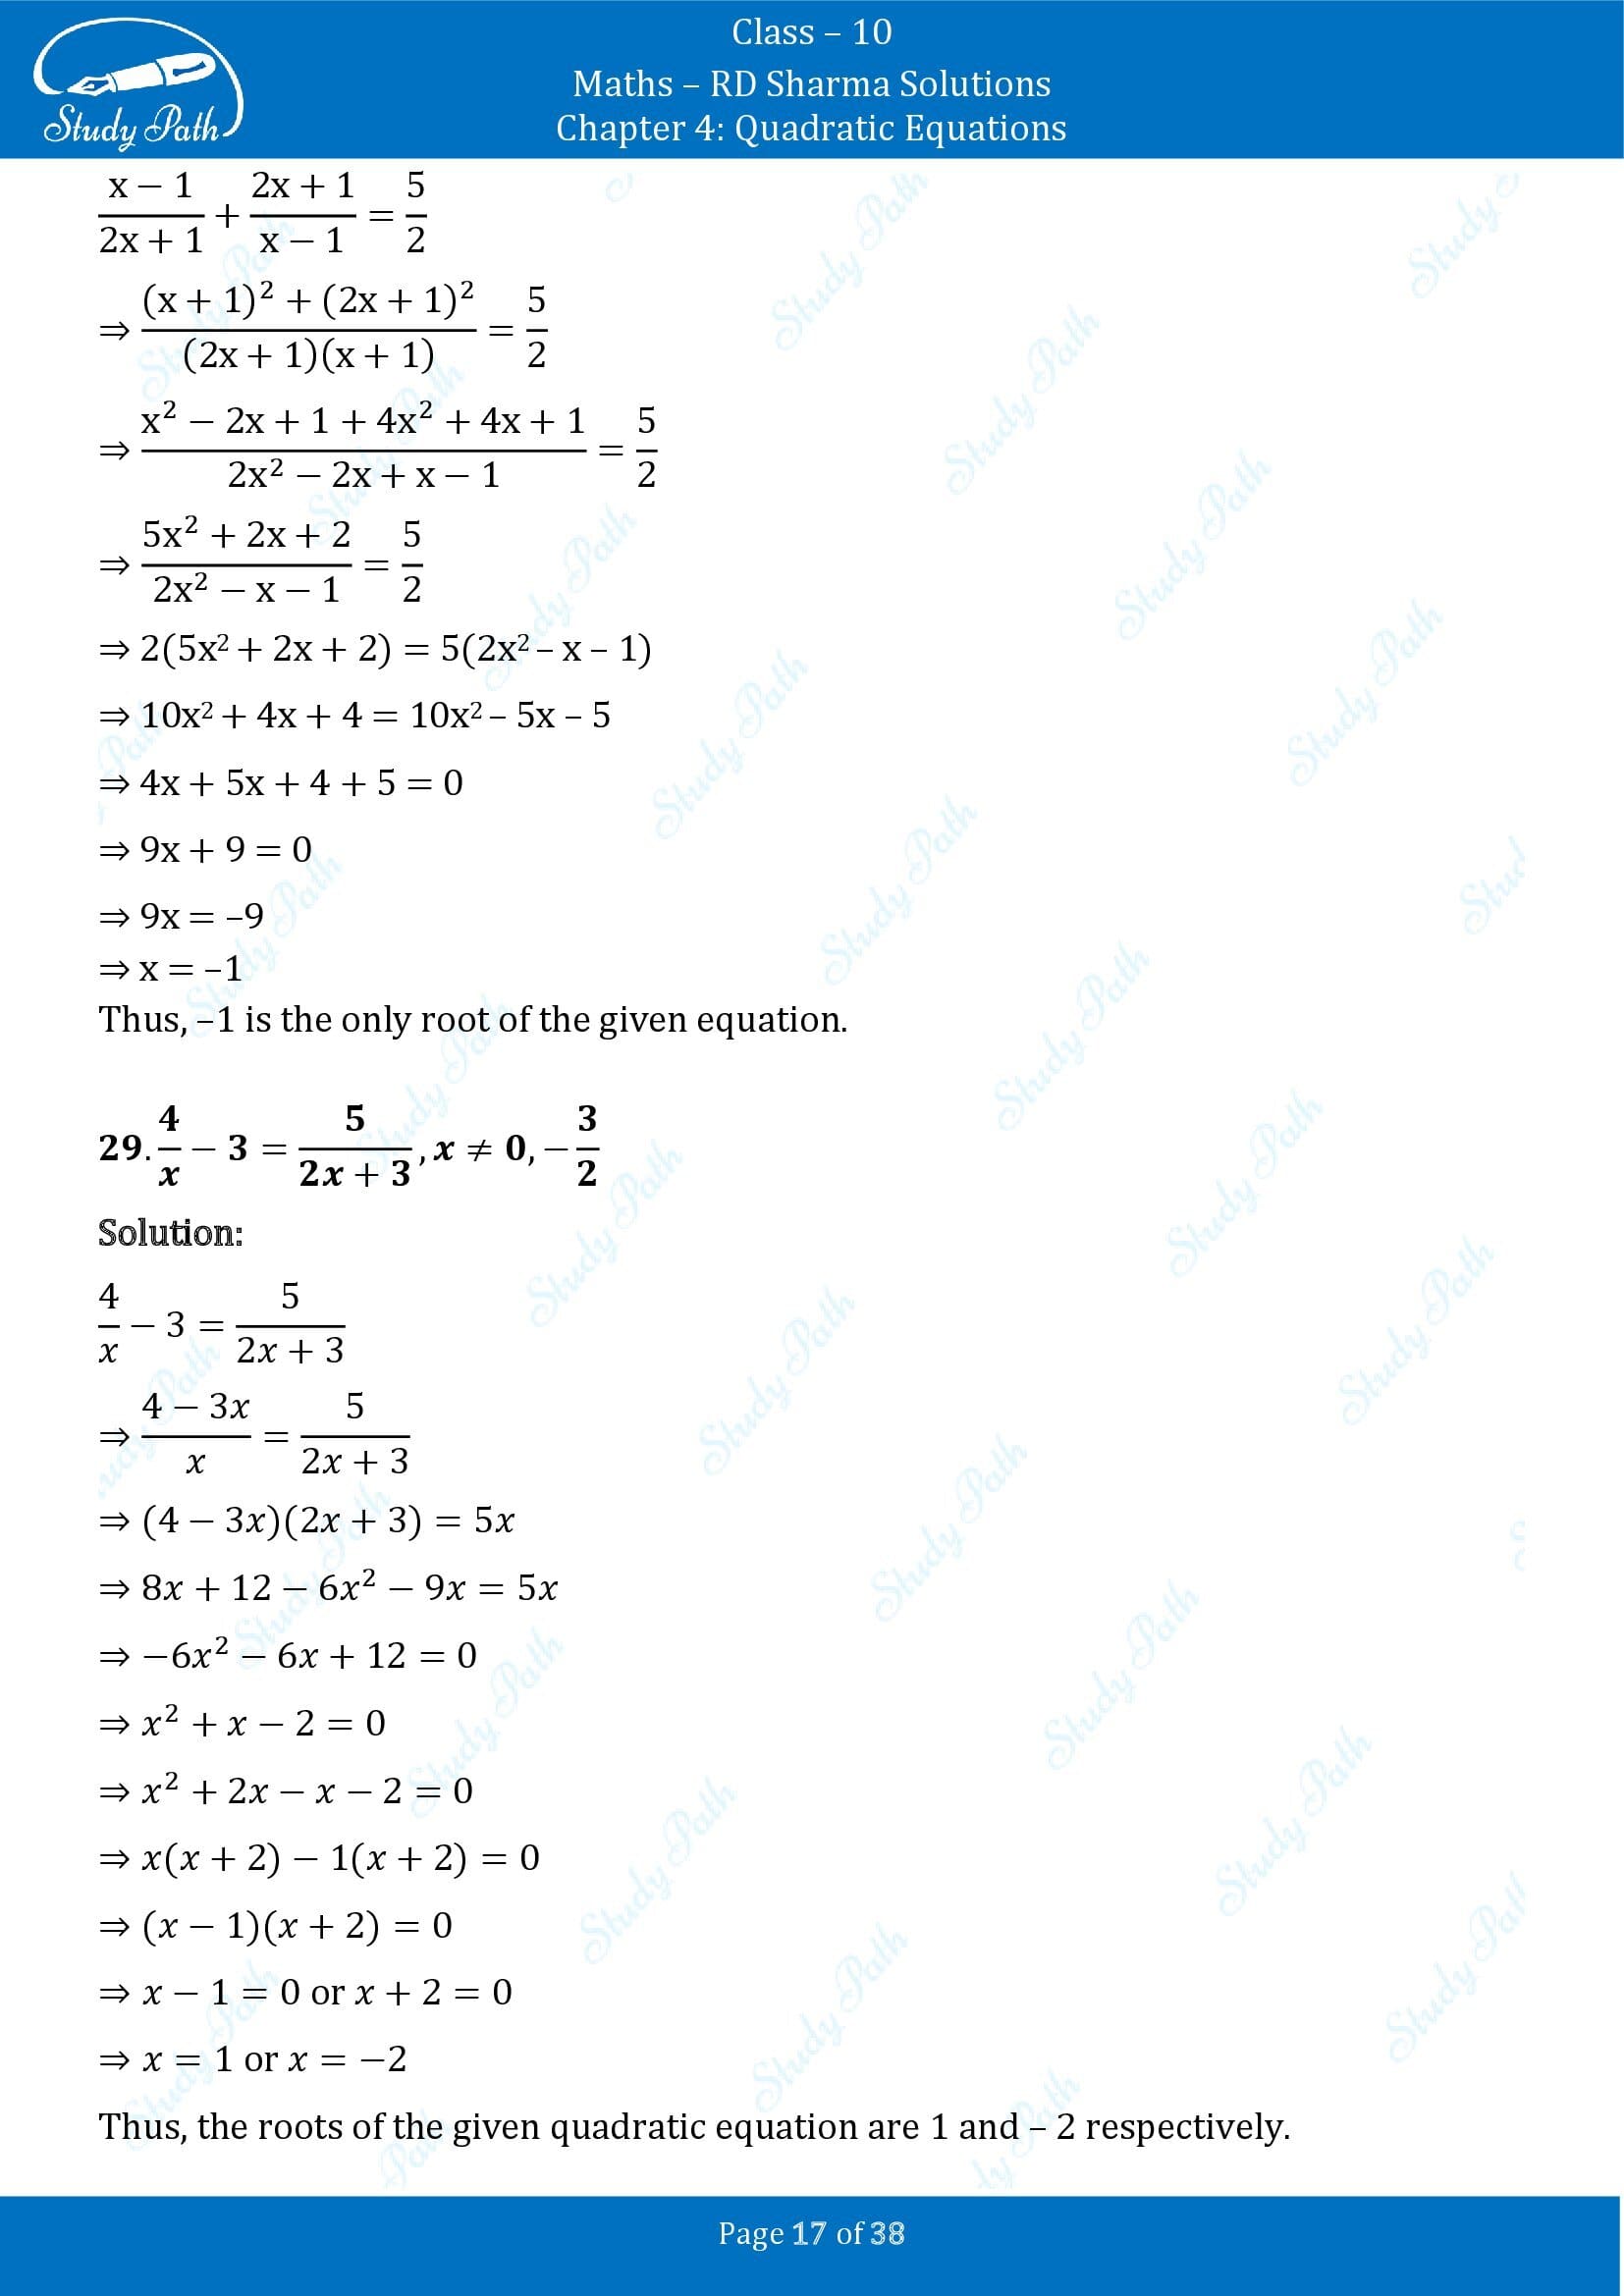 RD Sharma Solutions Class 10 Chapter 4 Quadratic Equations Exercise 4.3 00017